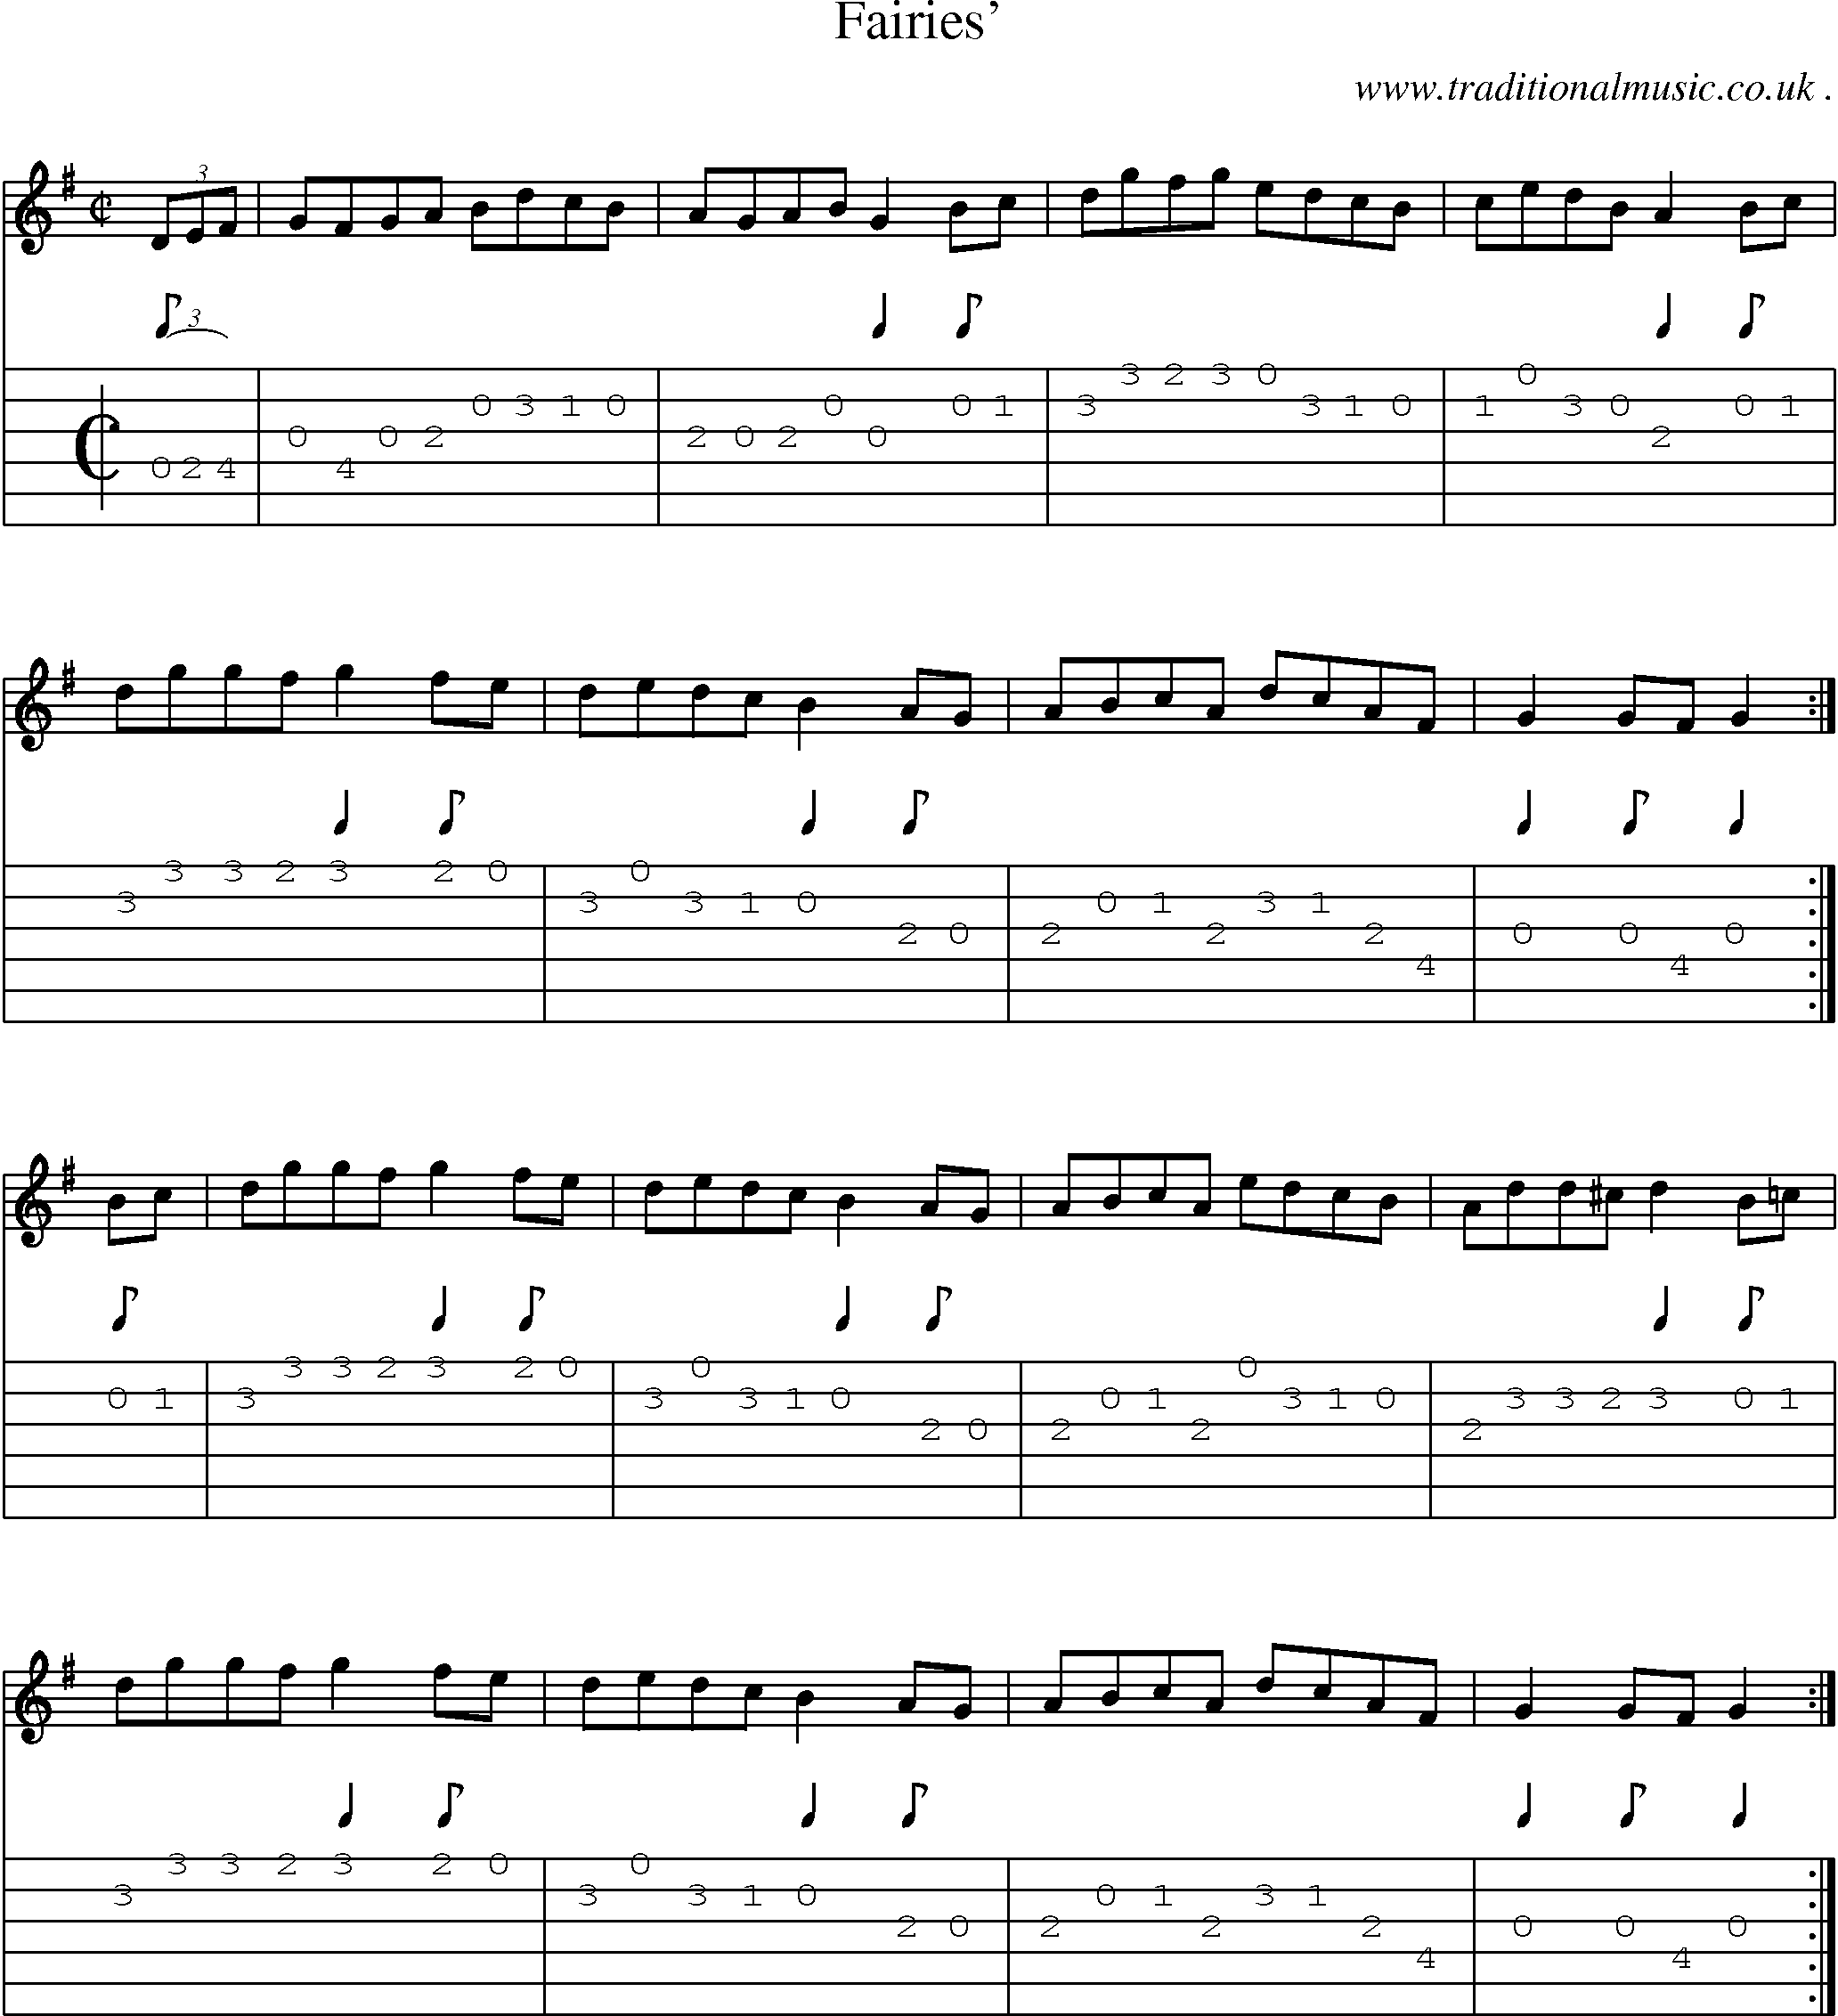 Sheet-Music and Guitar Tabs for Fairies